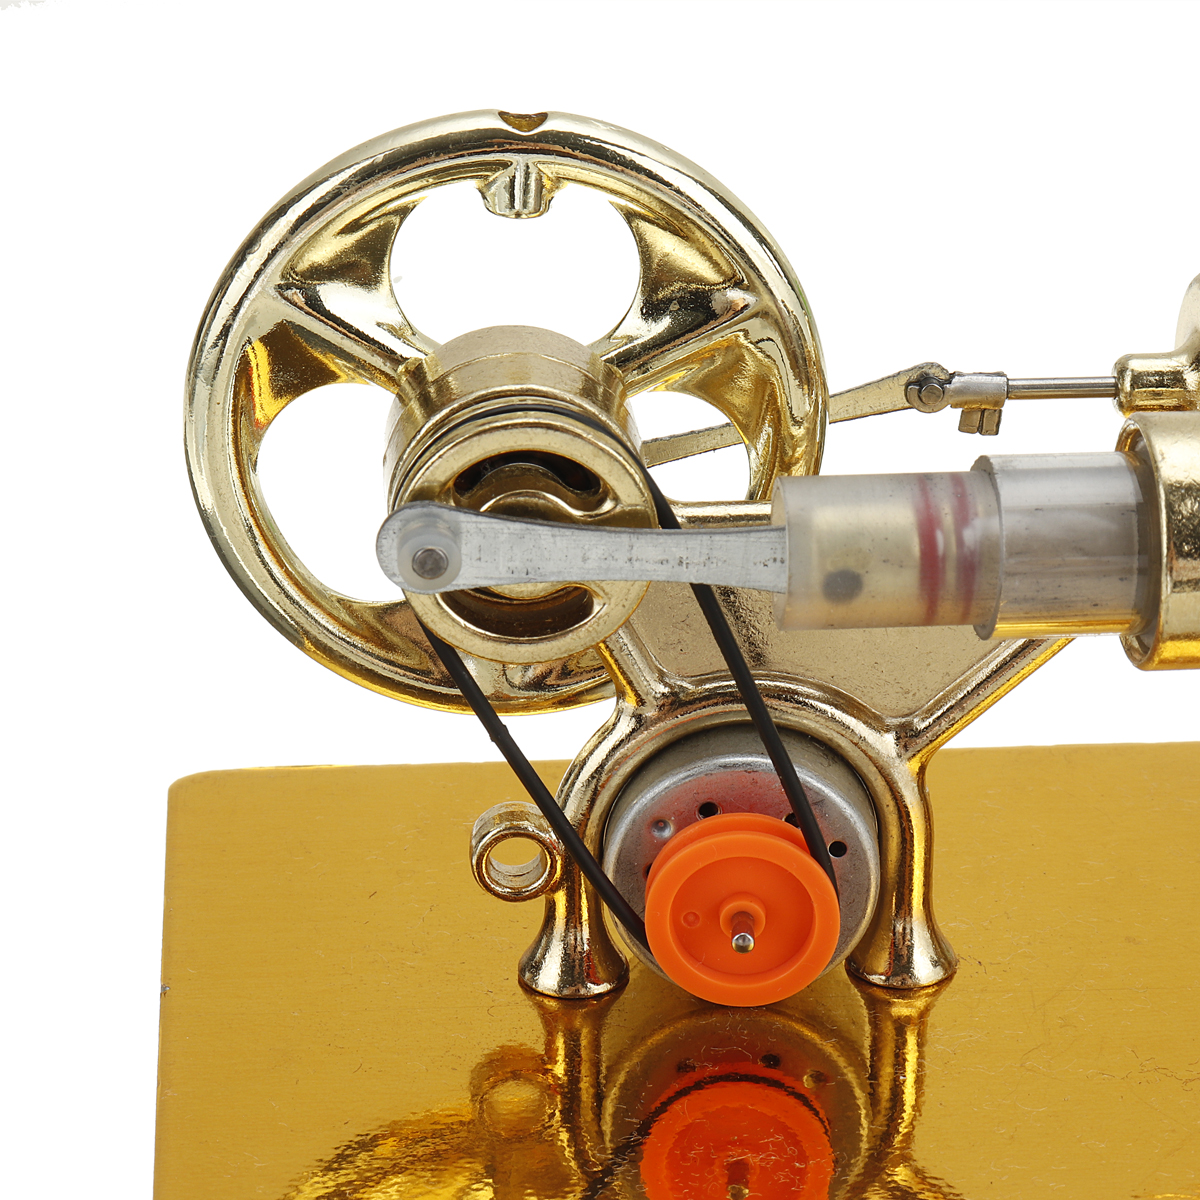 1PC-16-x-85-x-11-cm--Physical-Science-DIY-Kits-Stirling-Engine-Model-with-Parts-1939762-2